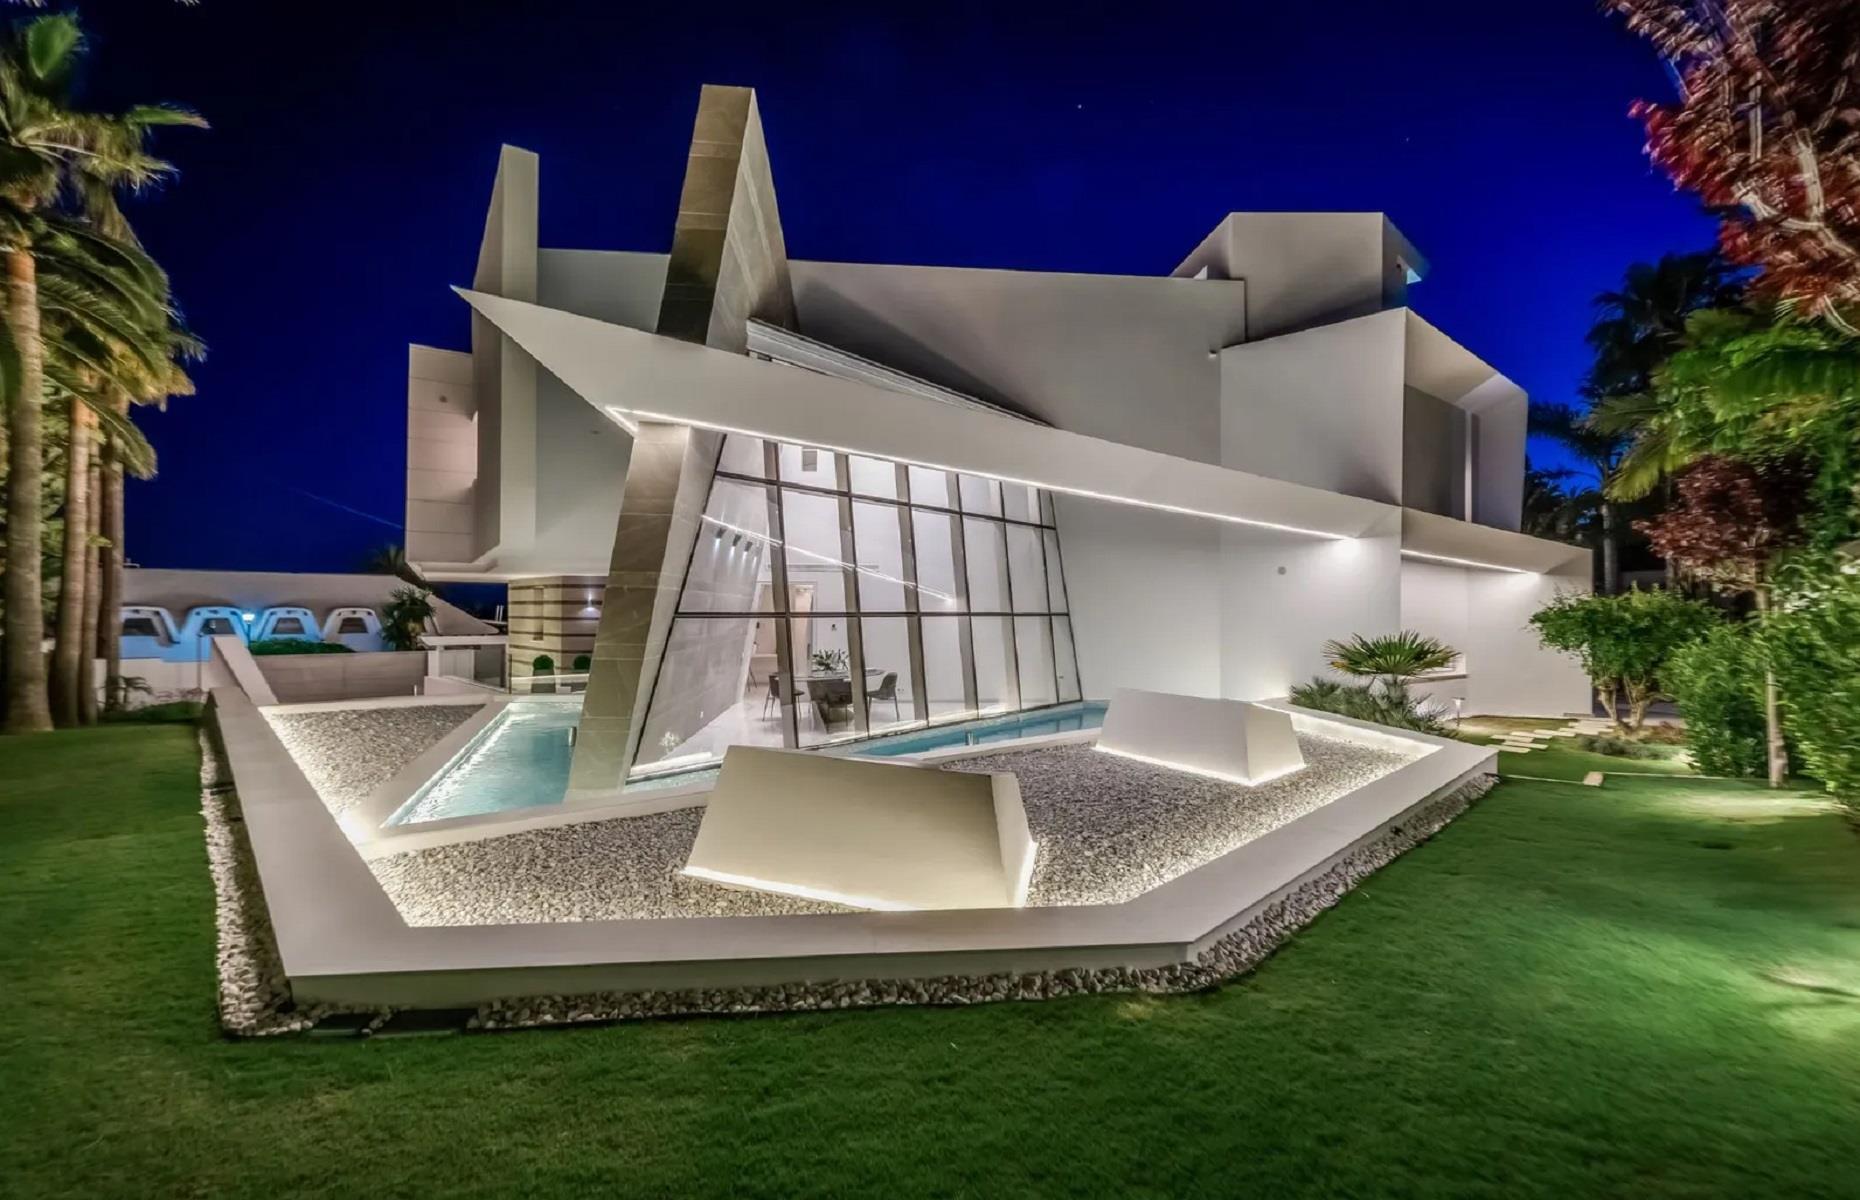 <p>This sharp, angular villa in Marbella, Spain, could definitely be described as unique. With its unusual façade that resembles a helmet or some sort of Transformers robot, it's a luxe home fit for an <a href="https://www.loveproperty.com/gallerylist/95390/why-an-eccentric-millionaire-abandoned-this-american-castle">eccentric millionaire</a>. </p>